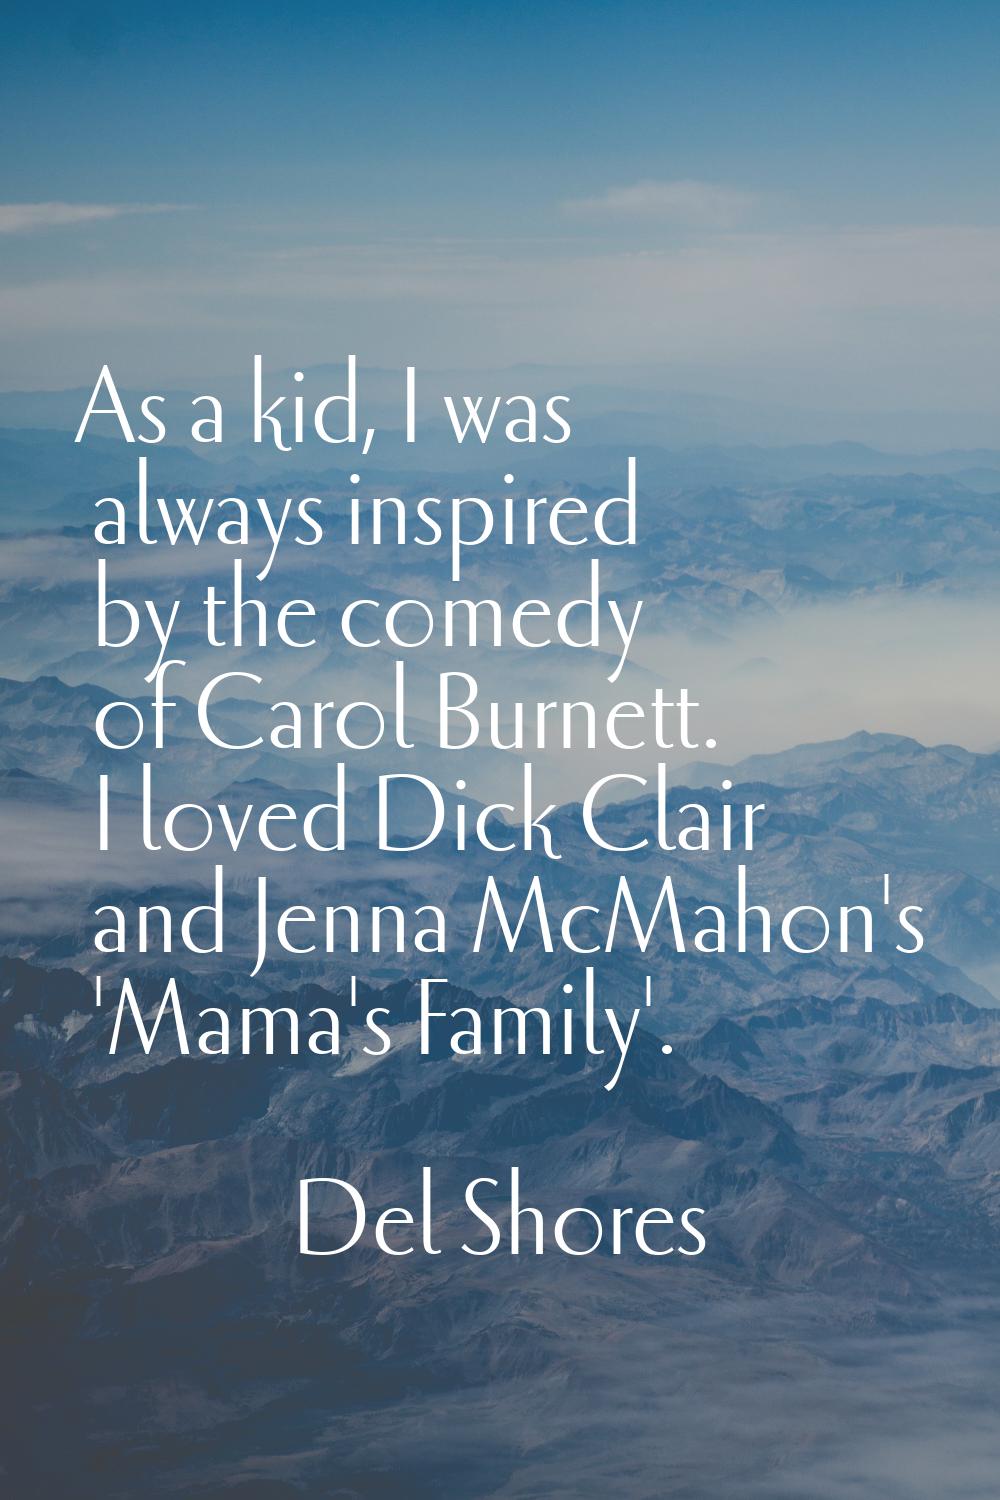 As a kid, I was always inspired by the comedy of Carol Burnett. I loved Dick Clair and Jenna McMaho